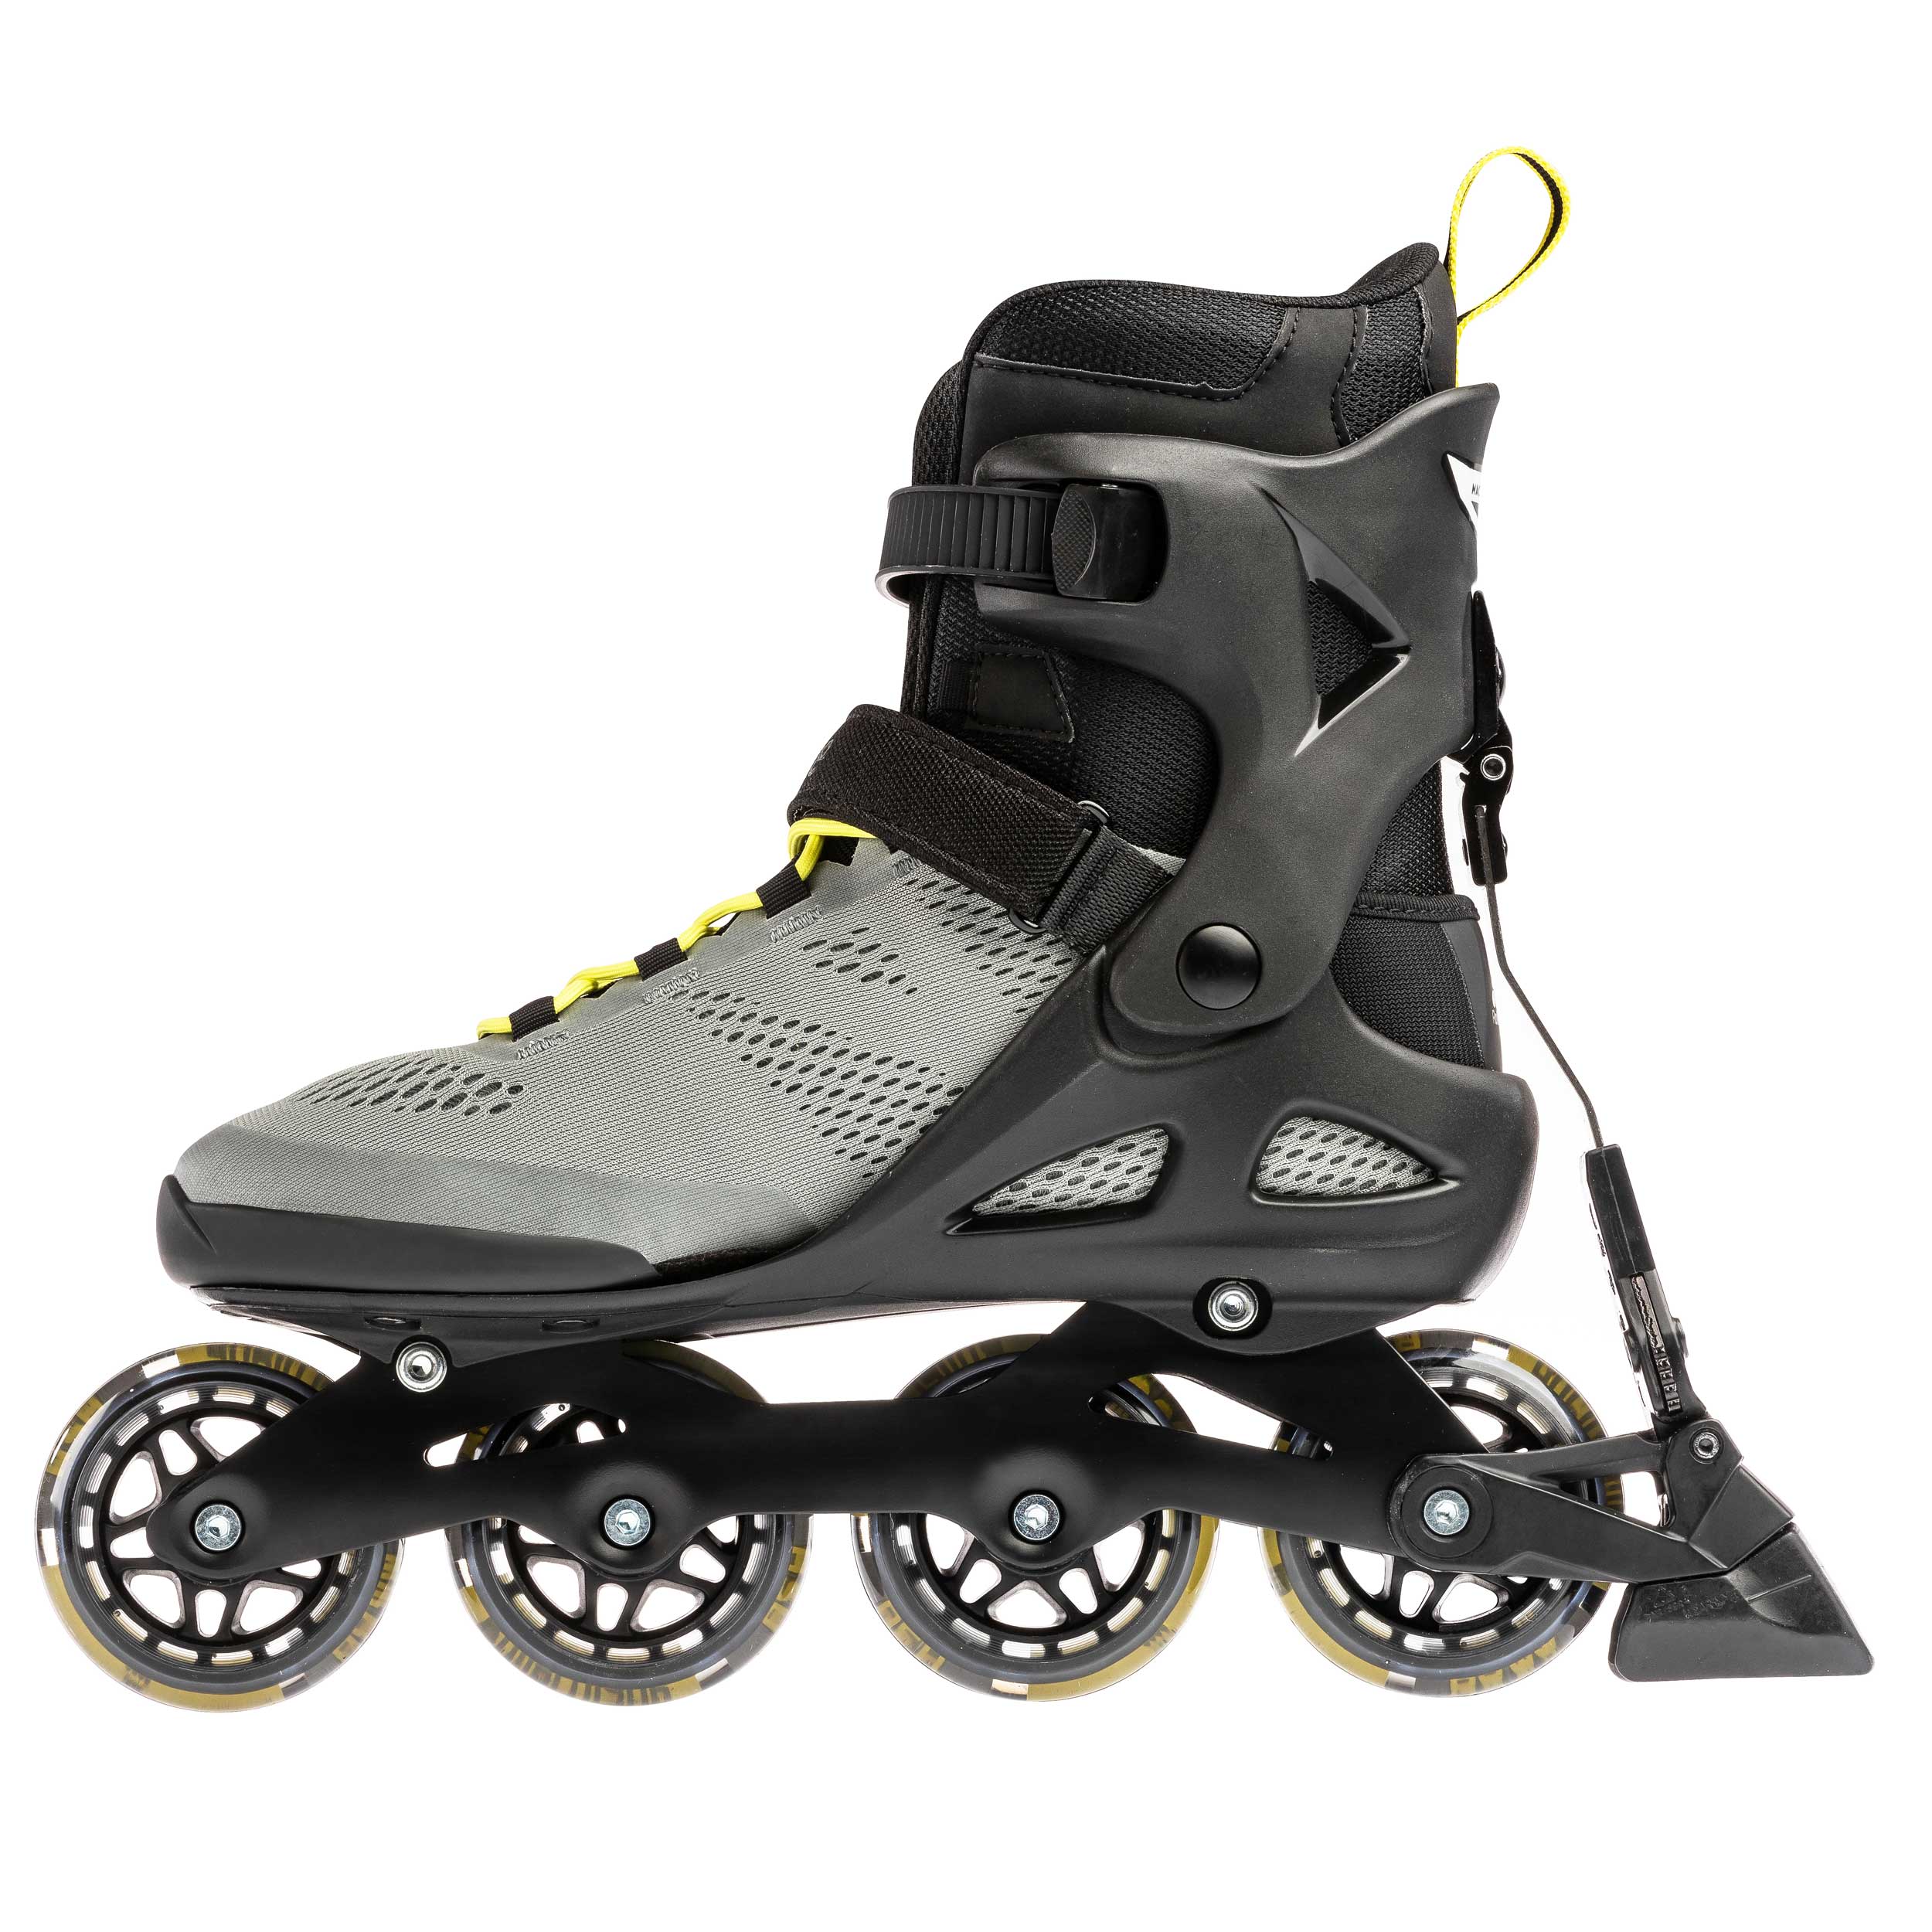 Details about   Rollerblade Macroblade 80 ABT Men's Inline Skates Silver/Neon Yellow 11.5 